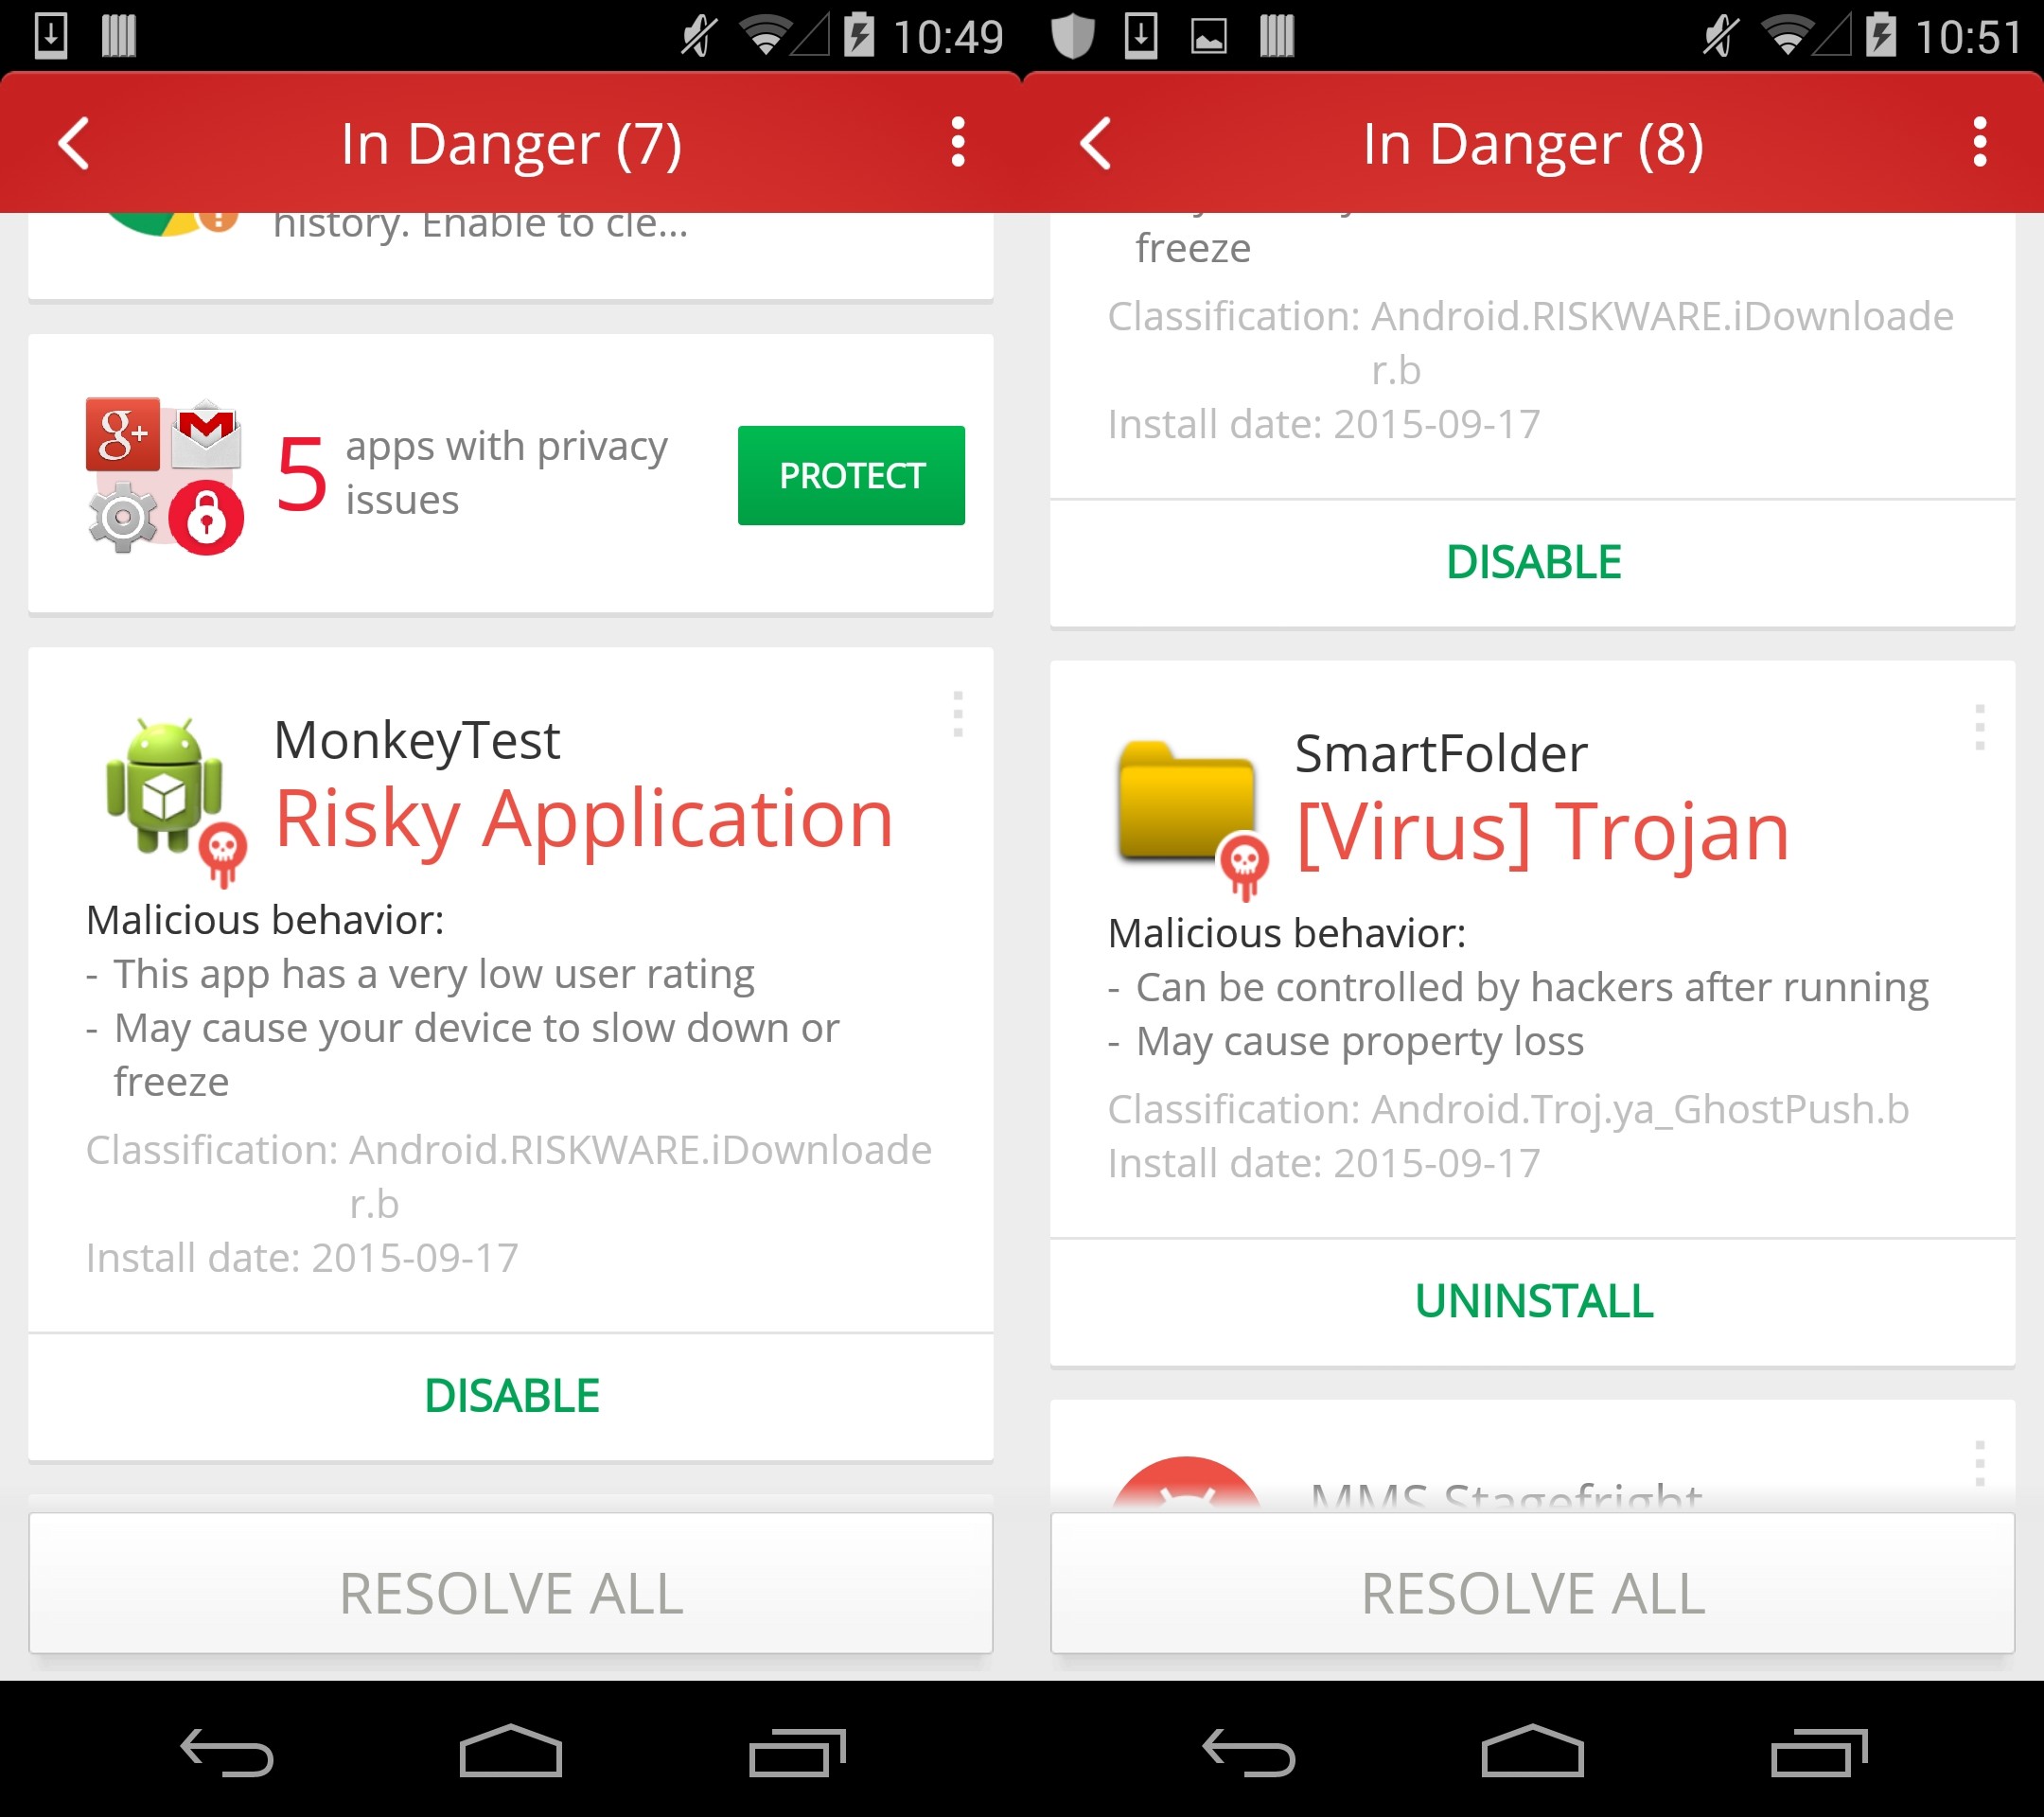 ghost-push-android-malware-infects-600-000-new-users-per-day-492167-2.jpg